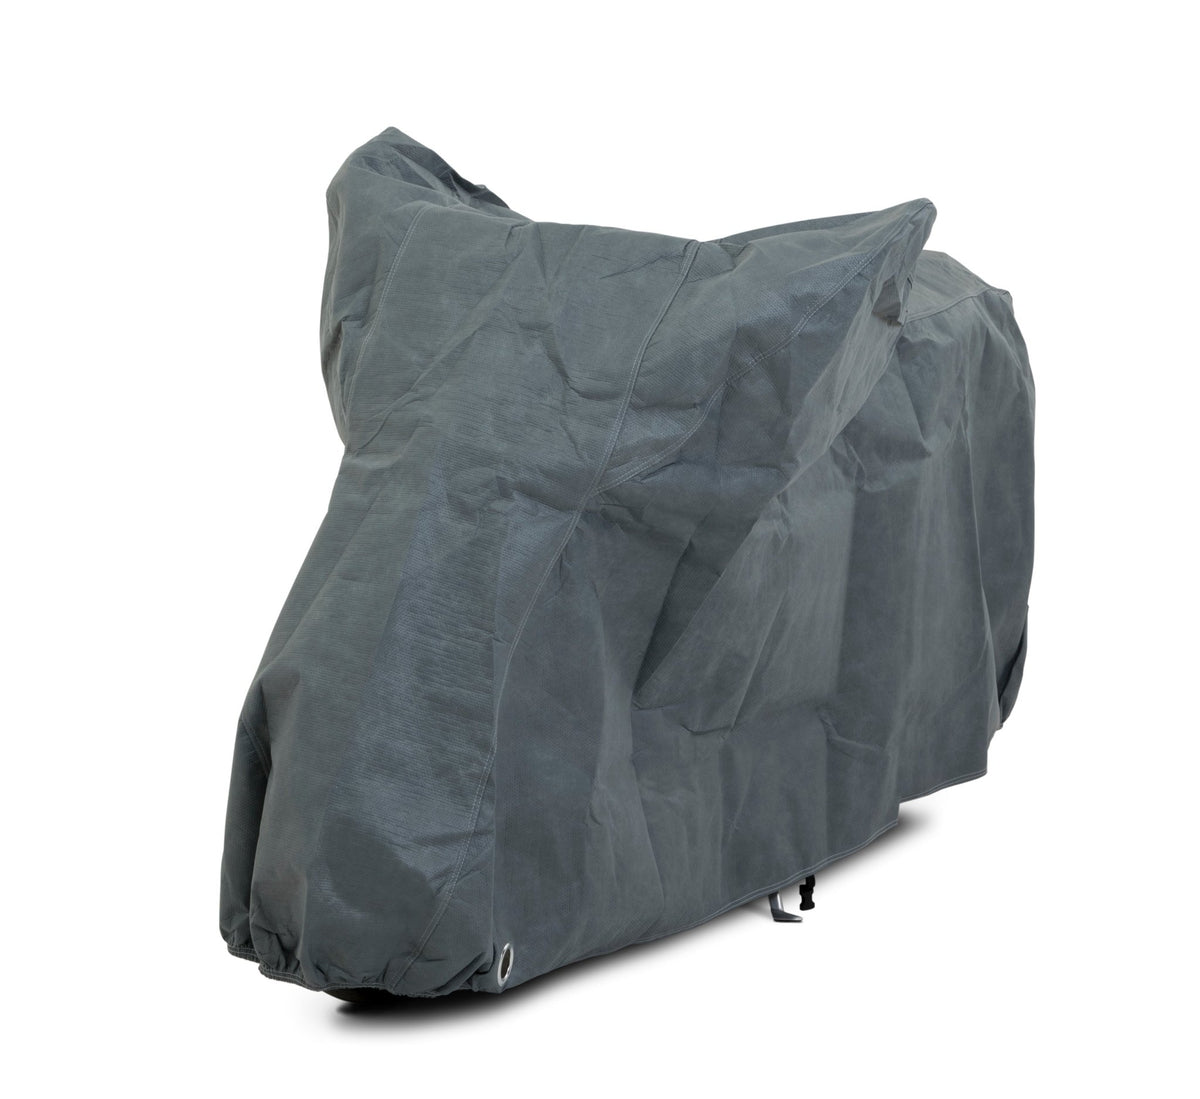 Stormforce best outdoor motorcycle covers for KTM - Storm Motorcycle Covers